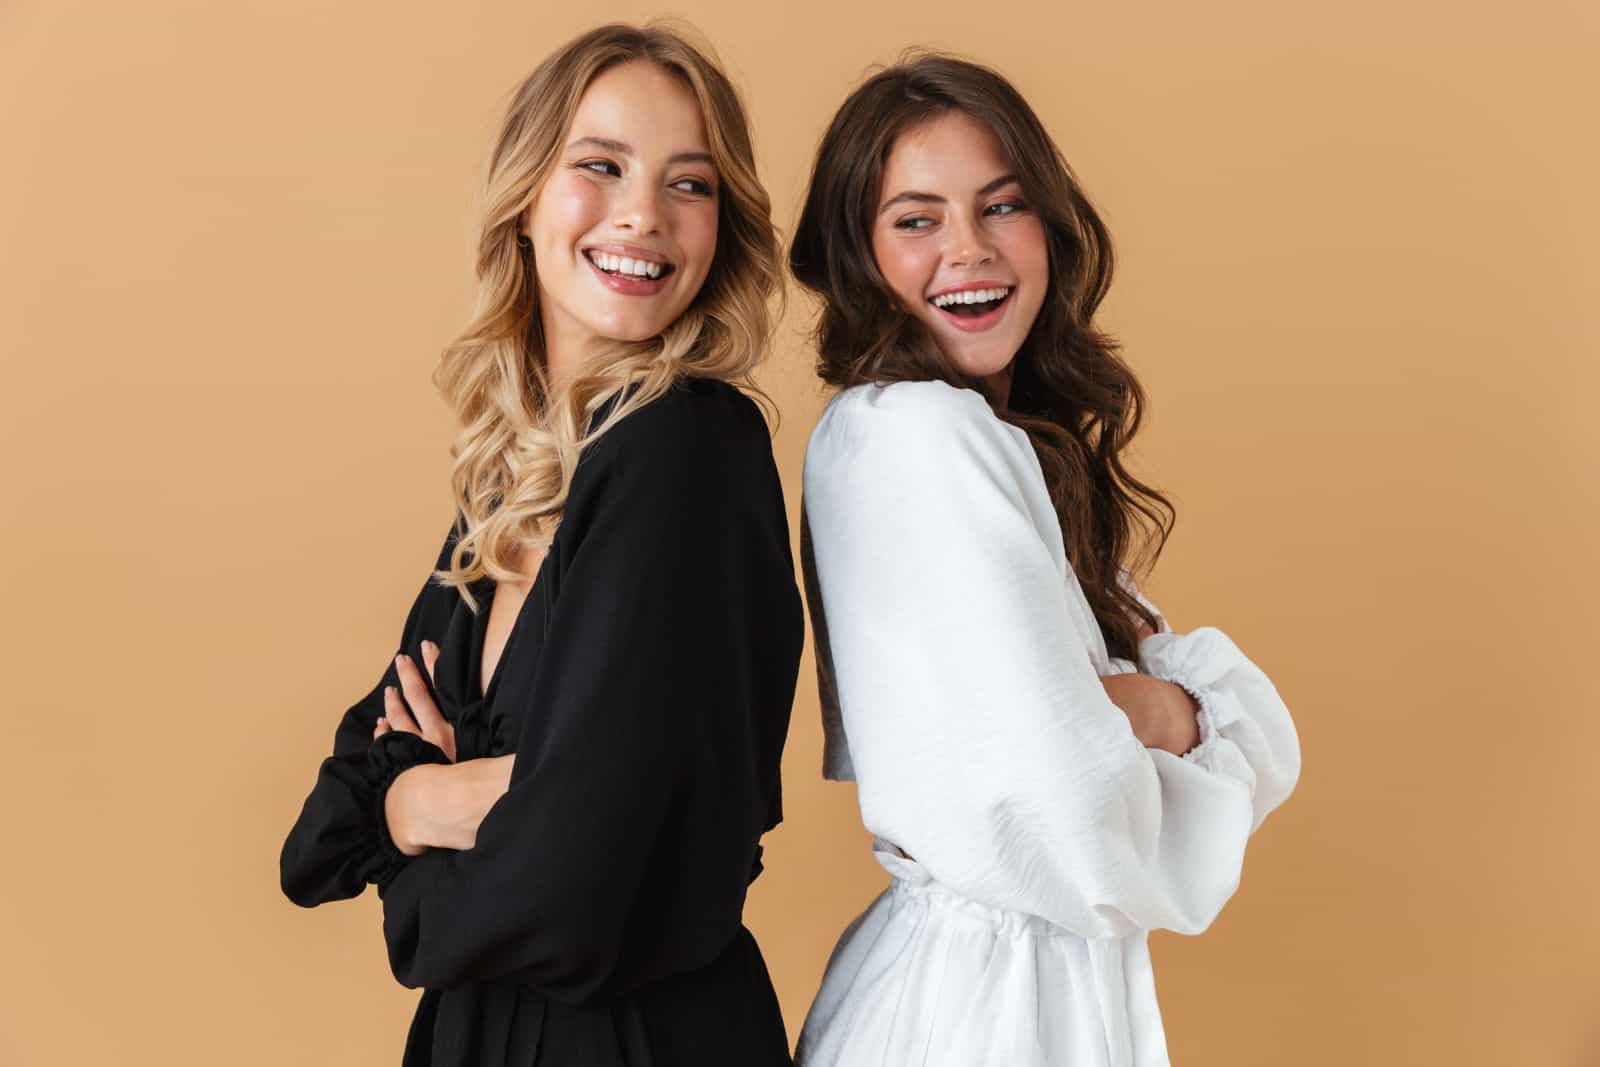 Portrait of two happy women in black and white clothes smiling